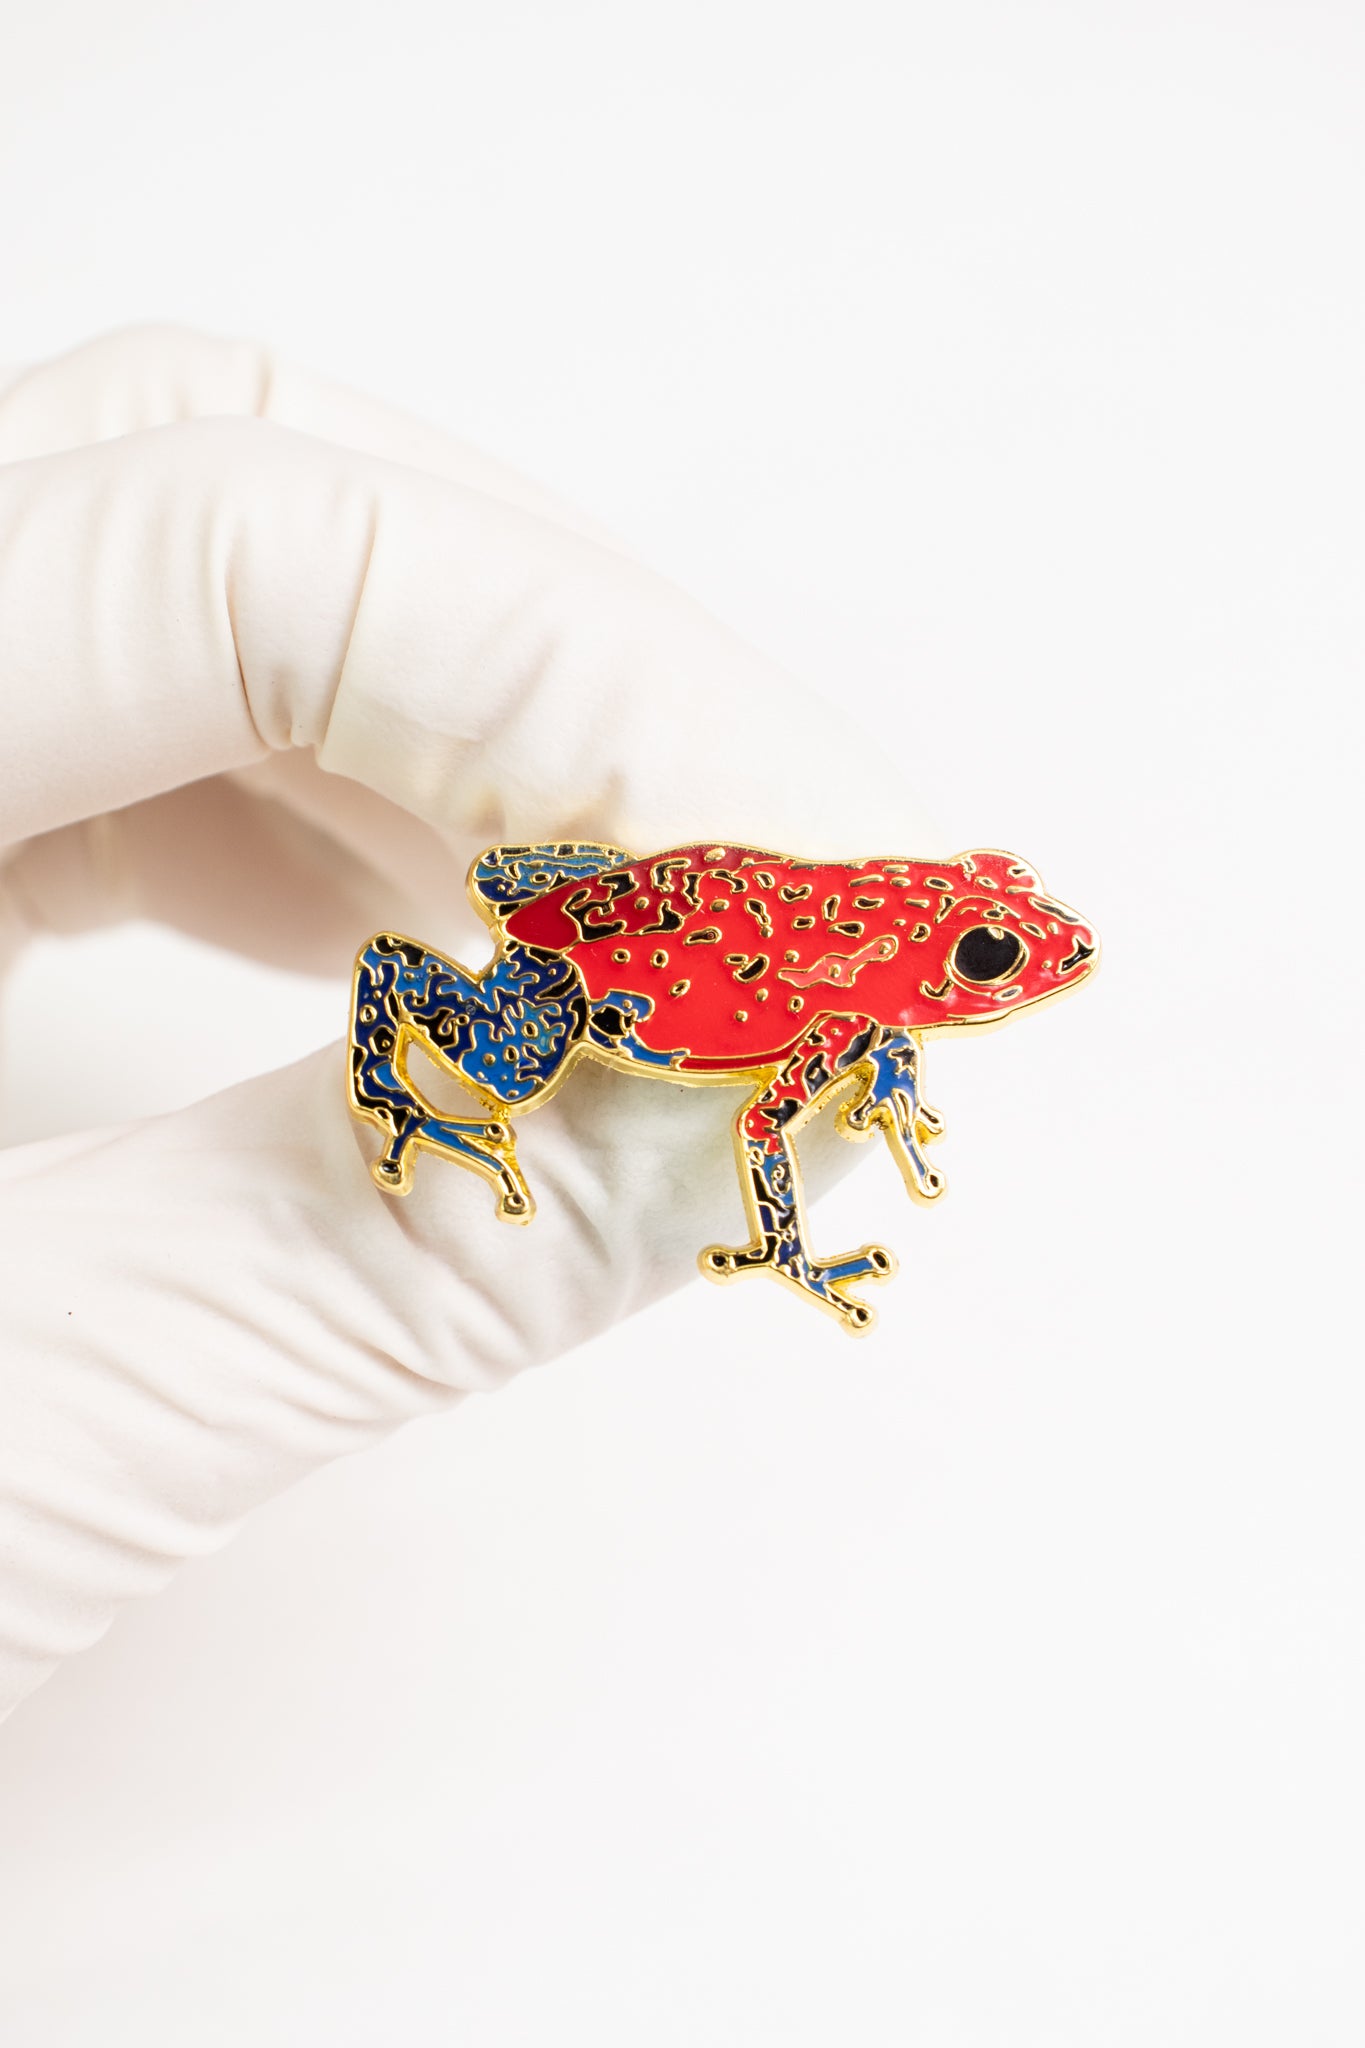 Strawberry Poison Dart Frog – Stemcell Science Shop